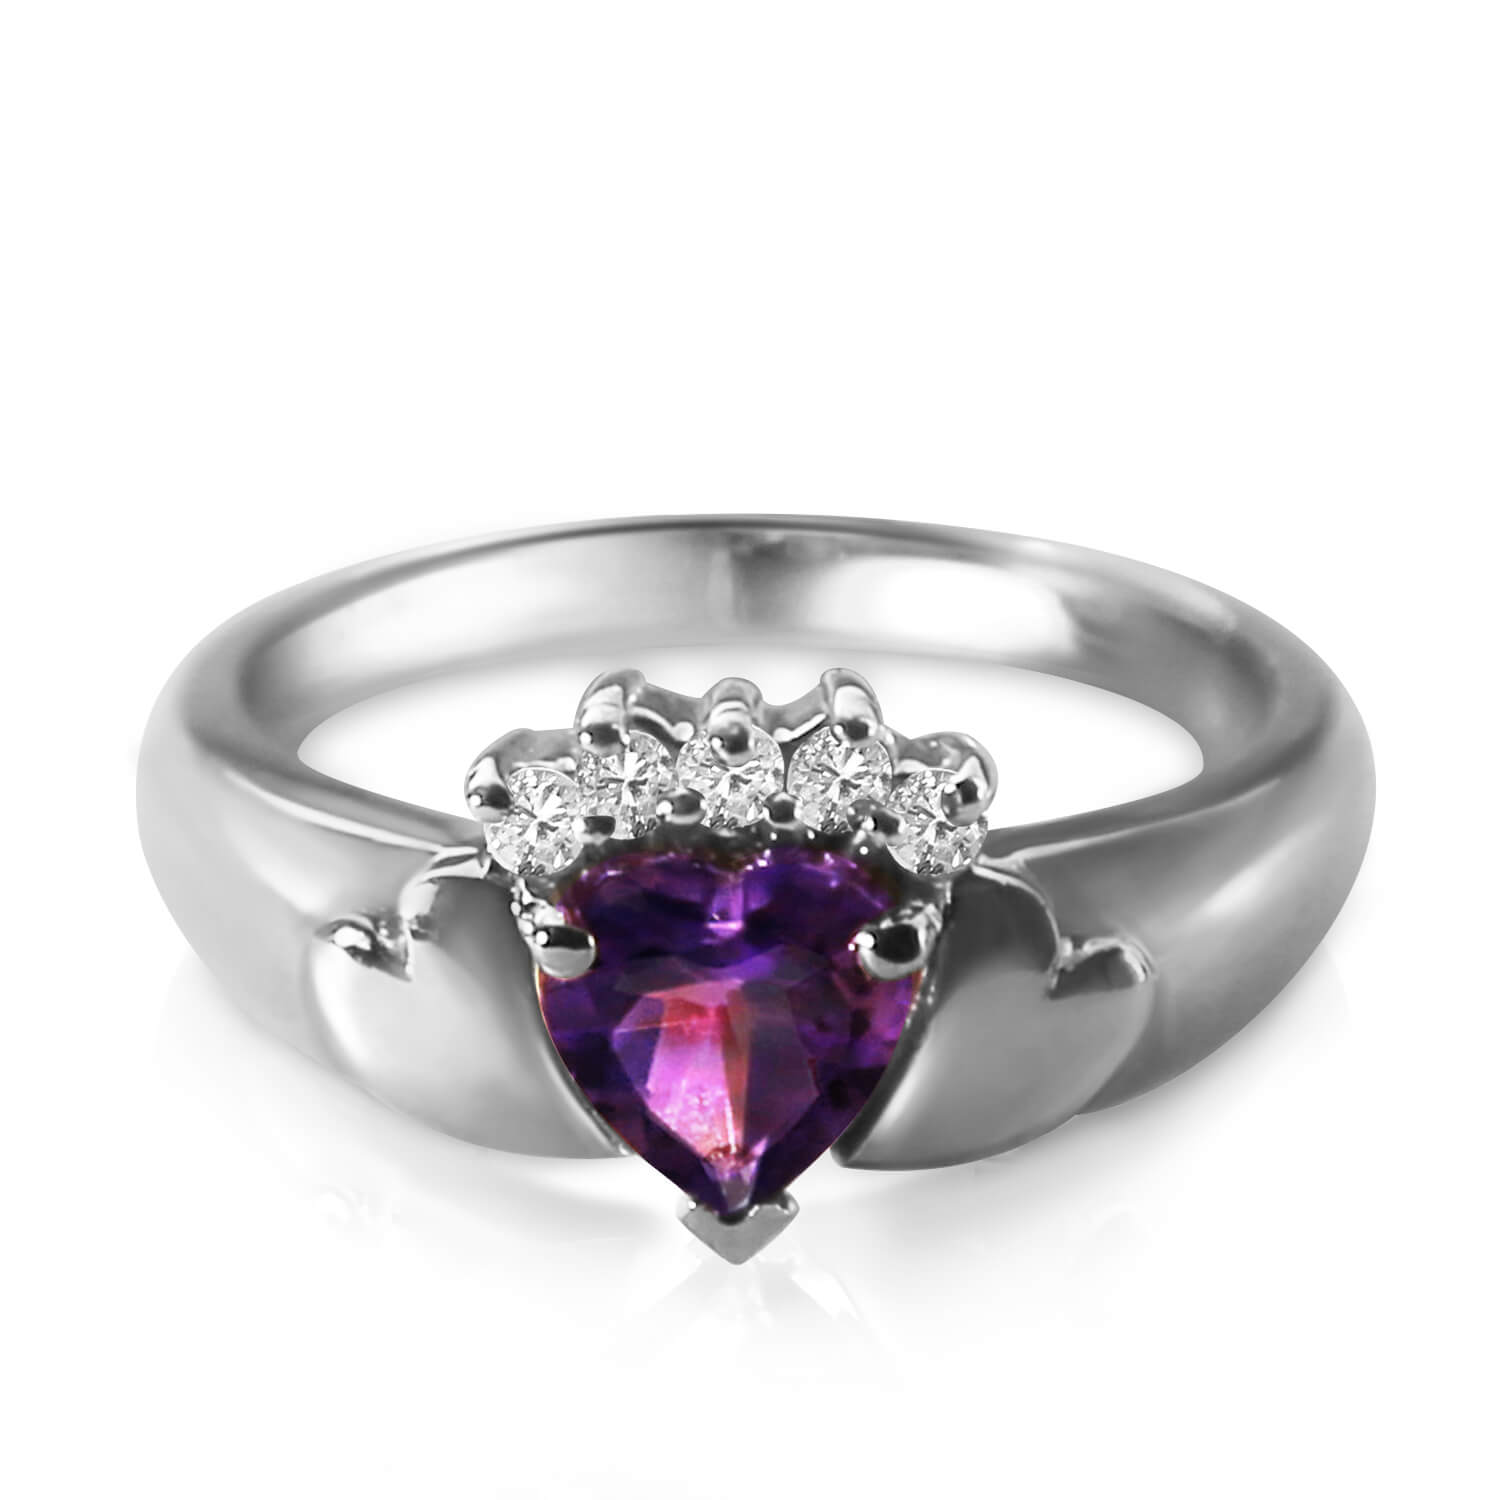 Heart Shaped Amethyst Ring 0.75 ctw in 18ct White Gold